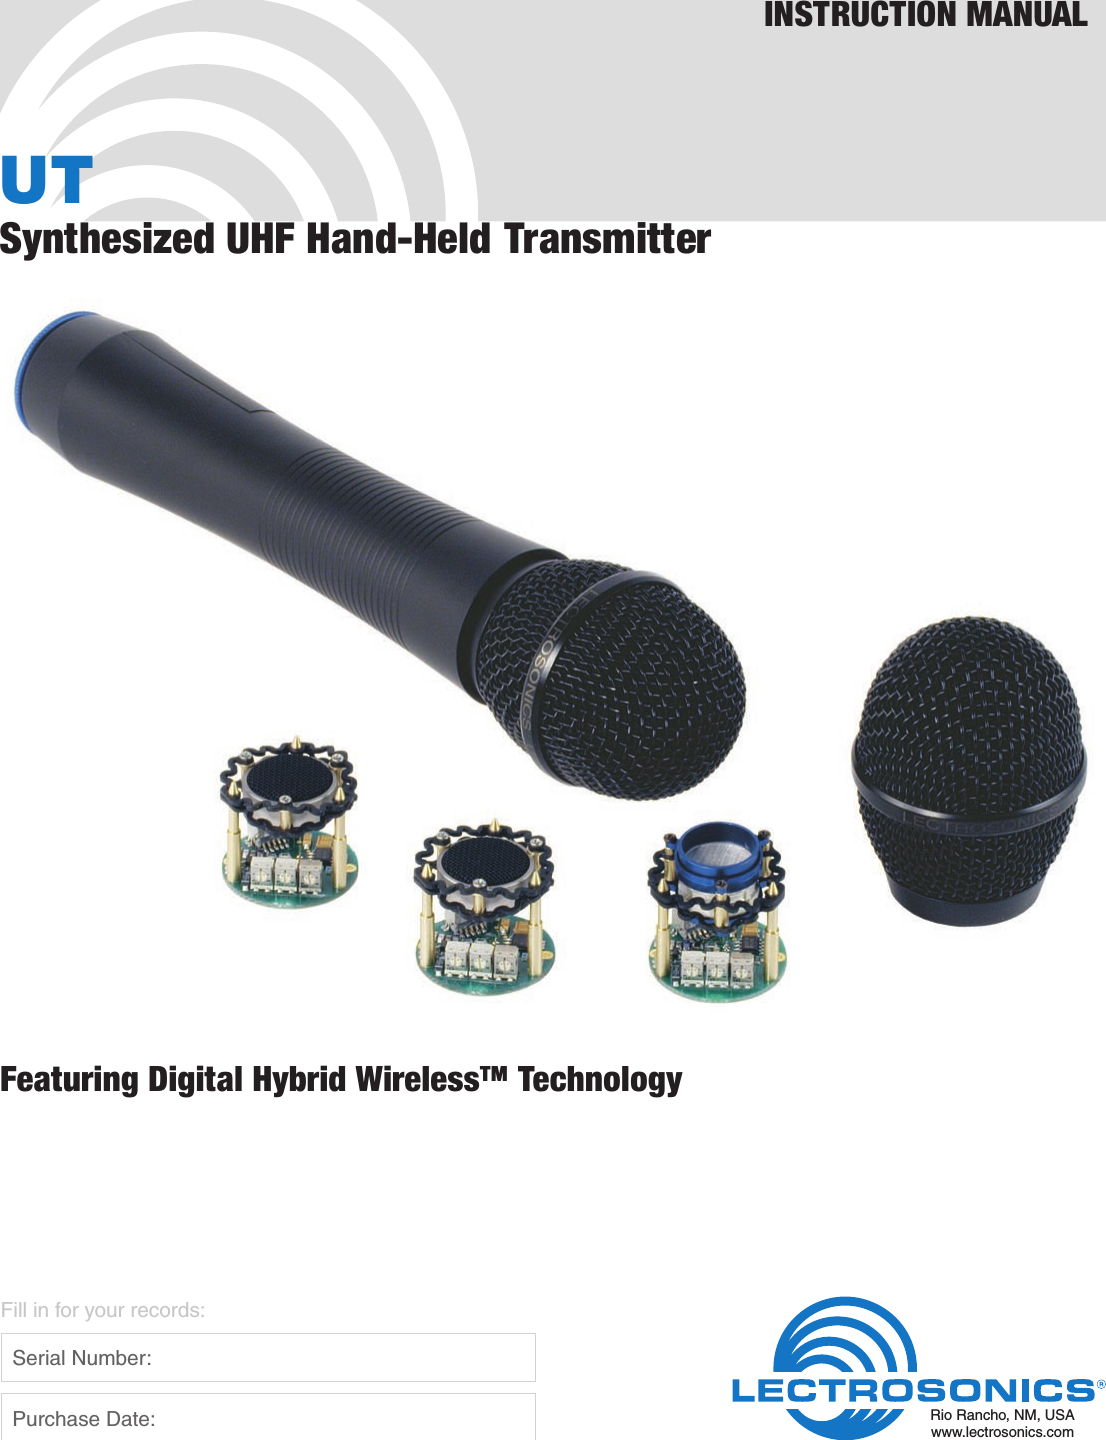 UTSynthesized UHF Hand-Held TransmitterFeaturing Digital Hybrid Wireless™ TechnologyINSTRUCTION MANUALRio Rancho, NM, USAwww.lectrosonics.comFill in for your records:  Serial Number:  Purchase Date: